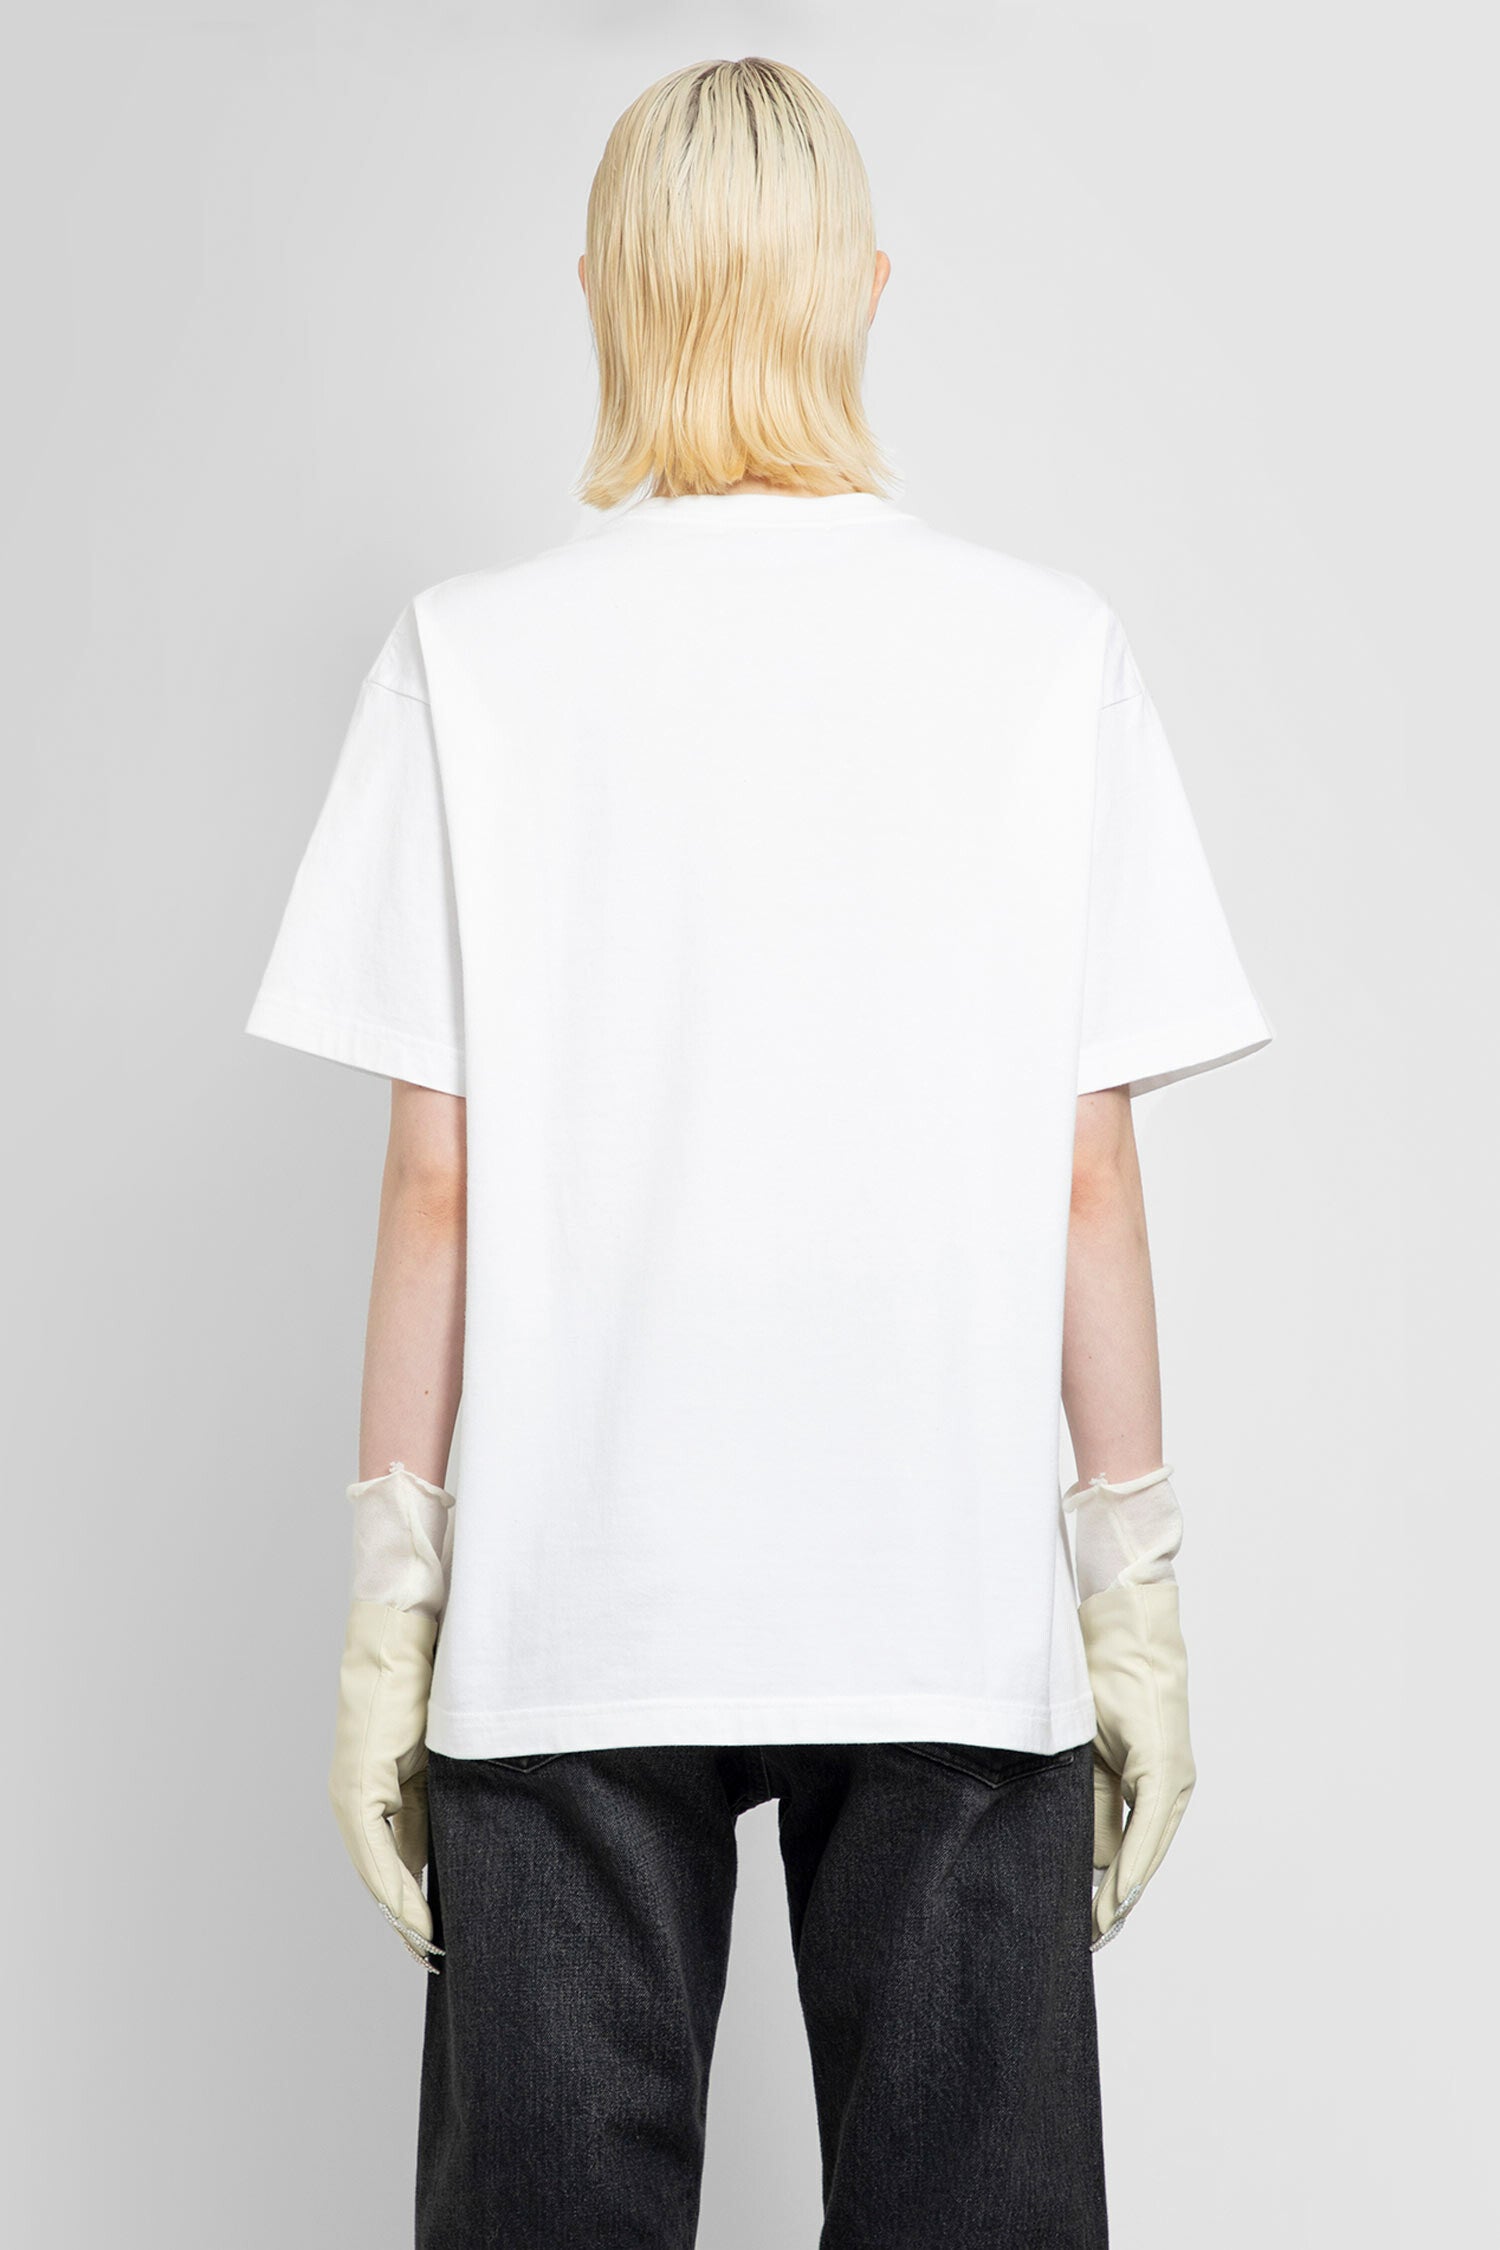 UNDERCOVER WOMAN WHITE T-SHIRTS